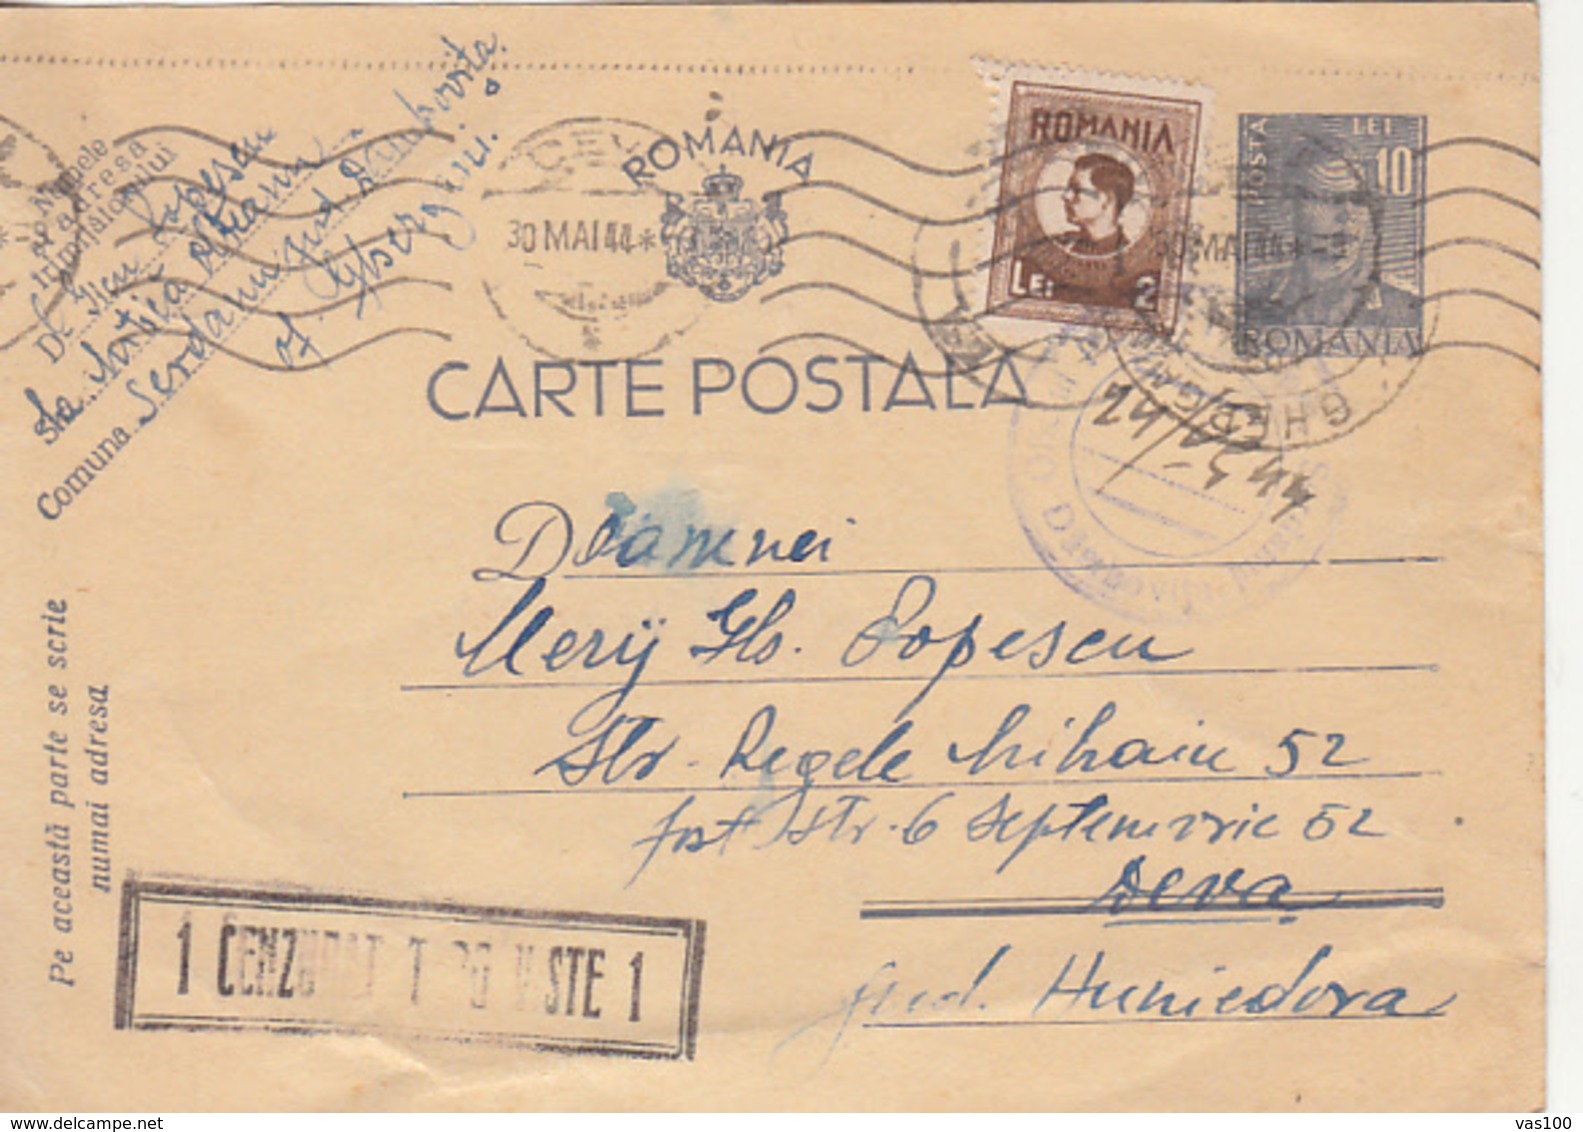 WW2 LETTER, MILITARY CENSORED, DEVA NR 23, WARFIELD POST OFFICE NR 30, 176, KING MICHAEL STAMP ON COVER, 1942, ROMANIA - Lettres 2ème Guerre Mondiale